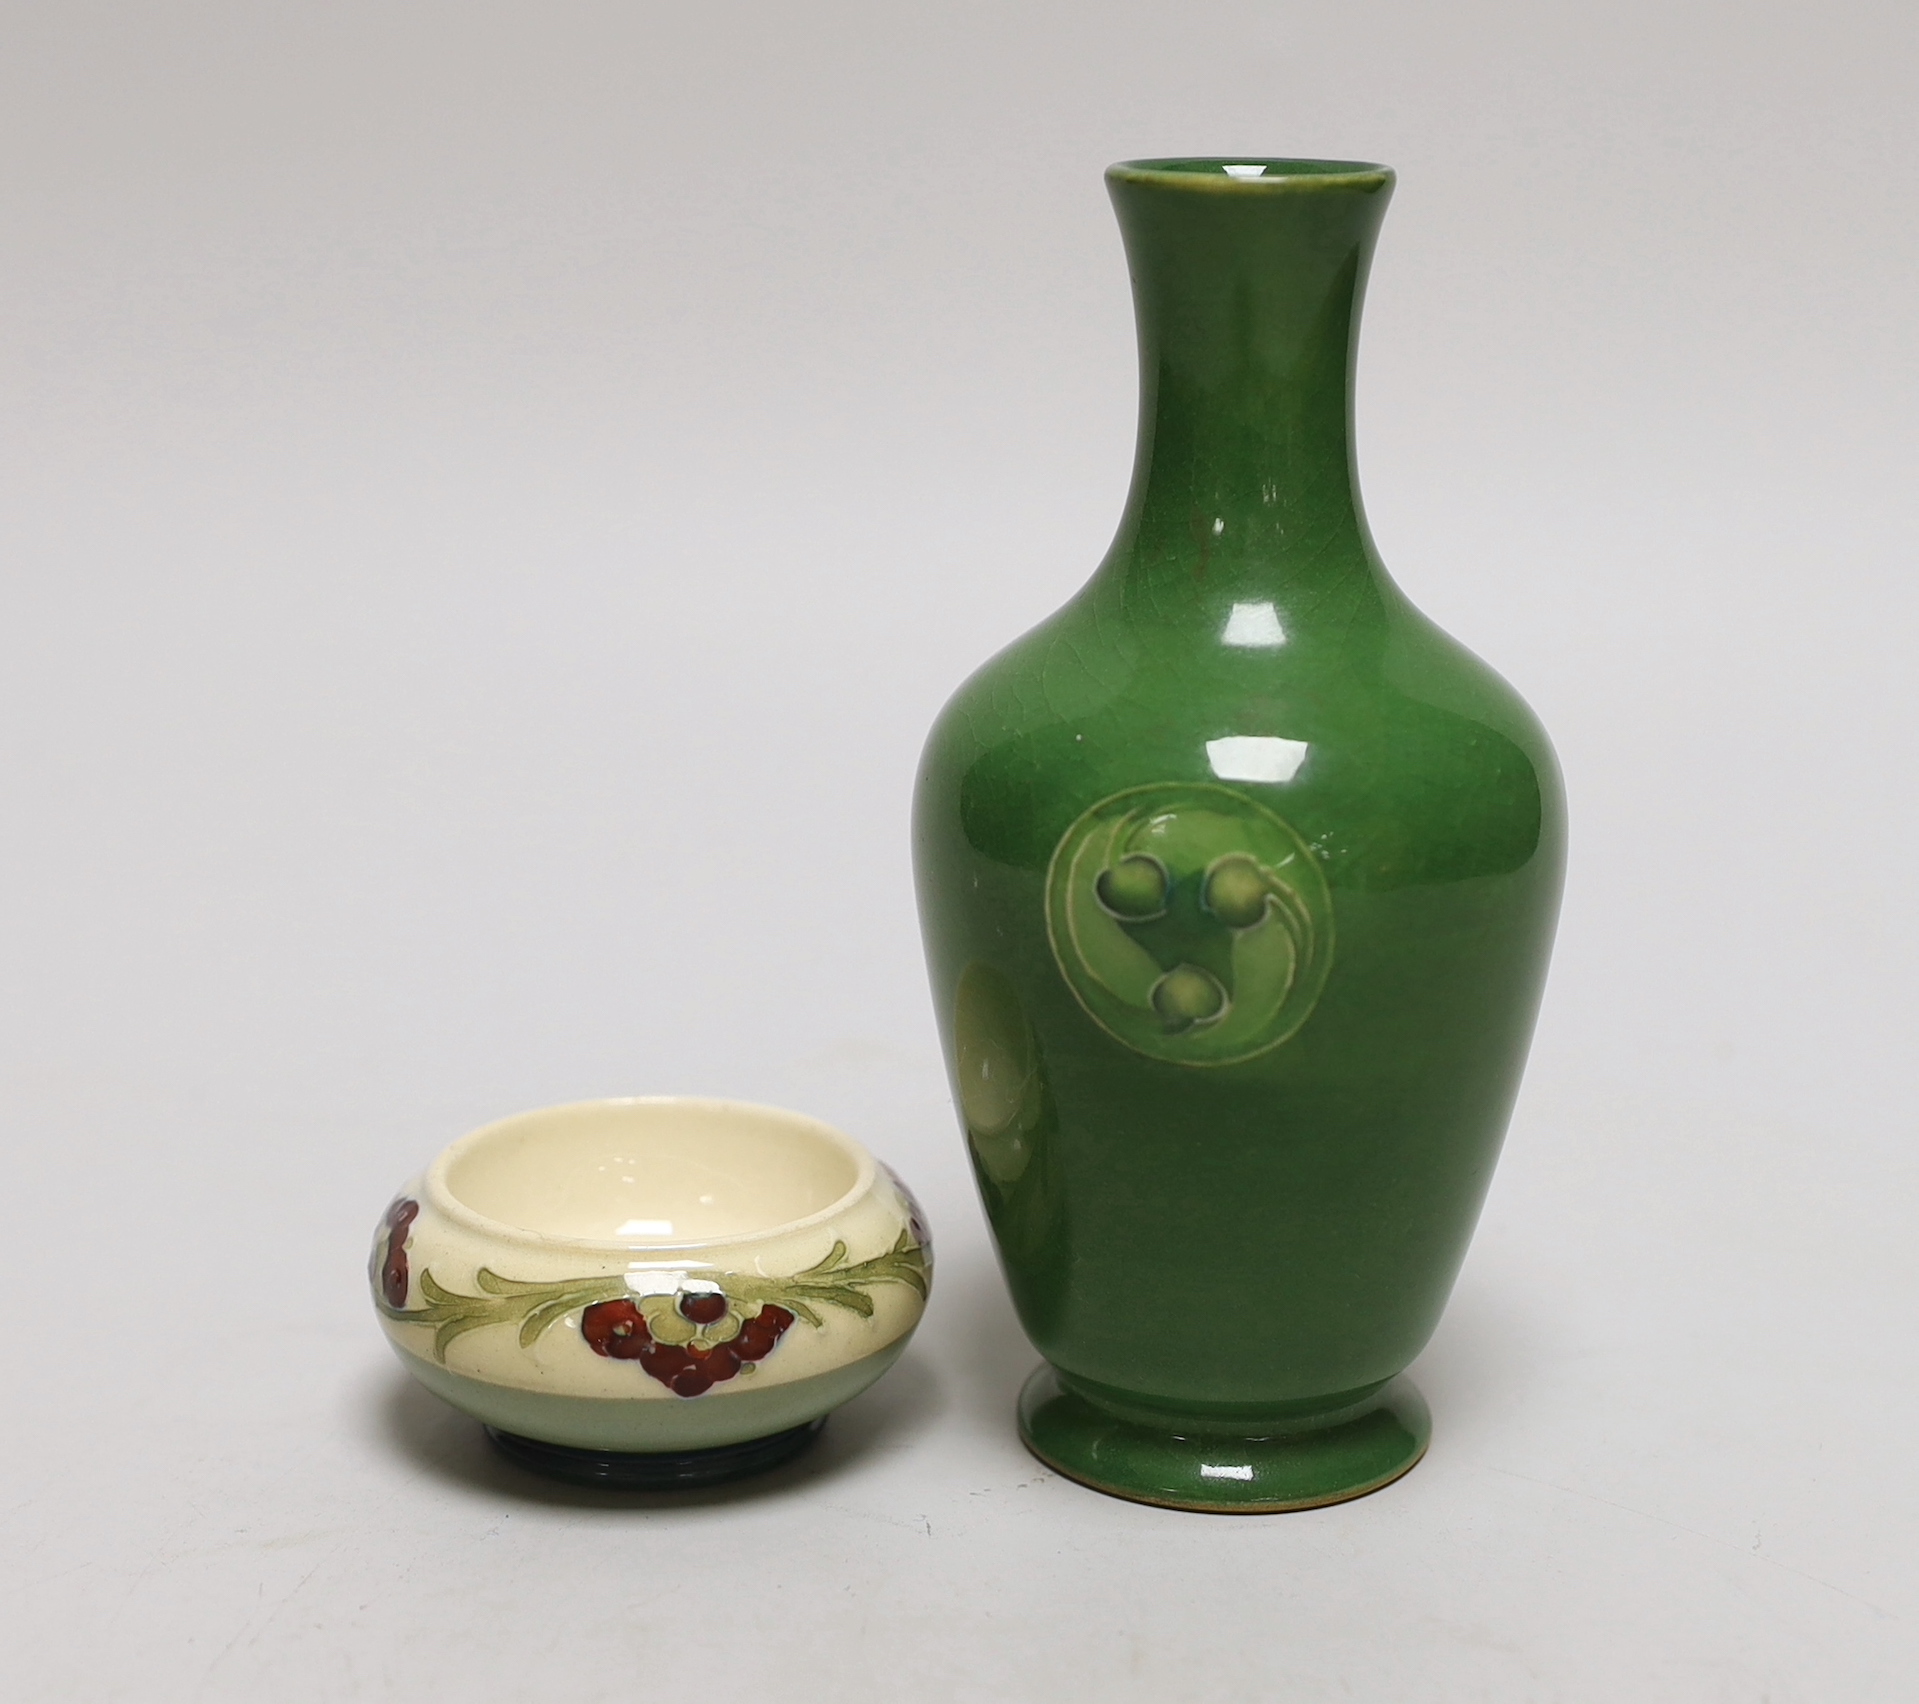 A Moorcroft for Liberty & Co. Flamminian ware green-glazed vase and a Mcintyre salt, tallest 13cm